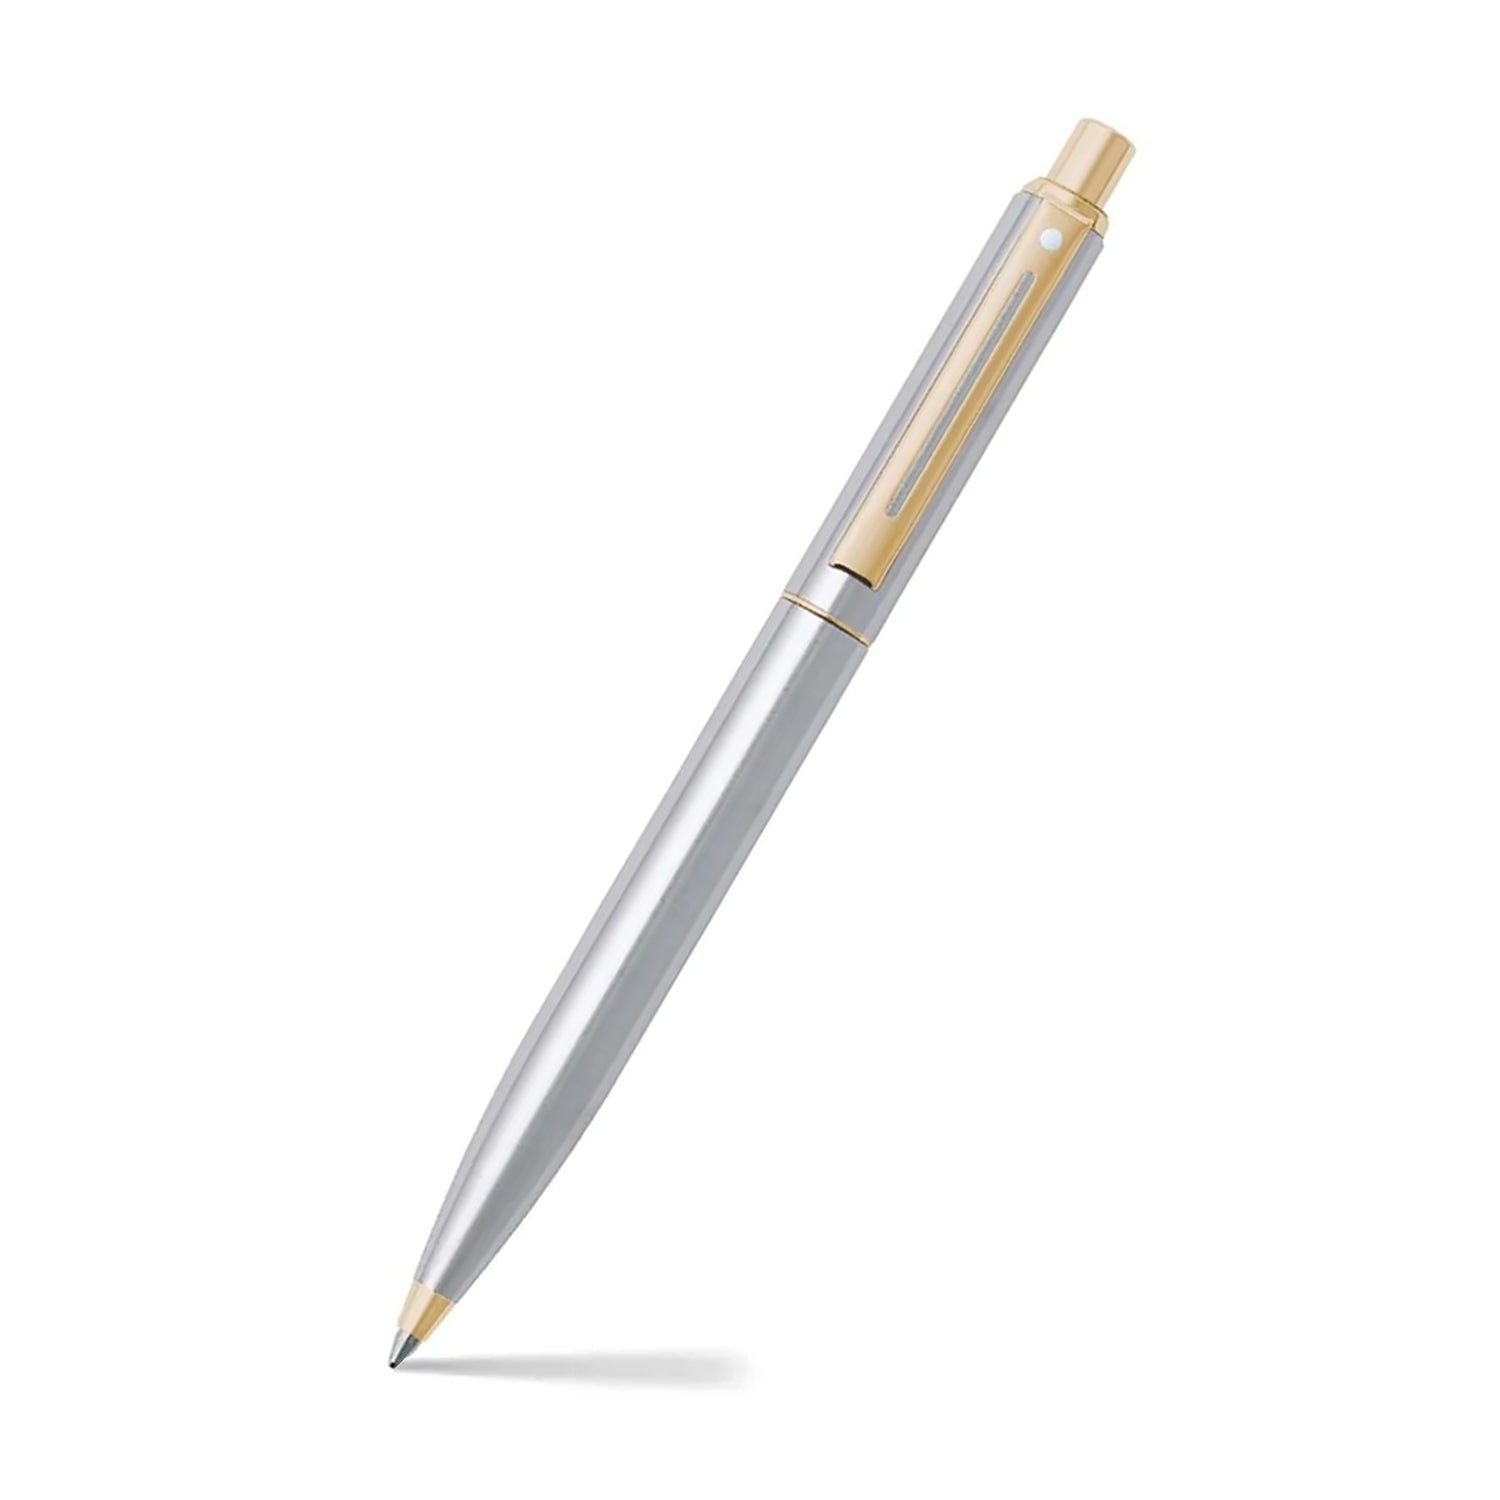 Sheaffer® Sentinel 325 Brushed Chrome Ballpoint pen with Gold Tone Trim